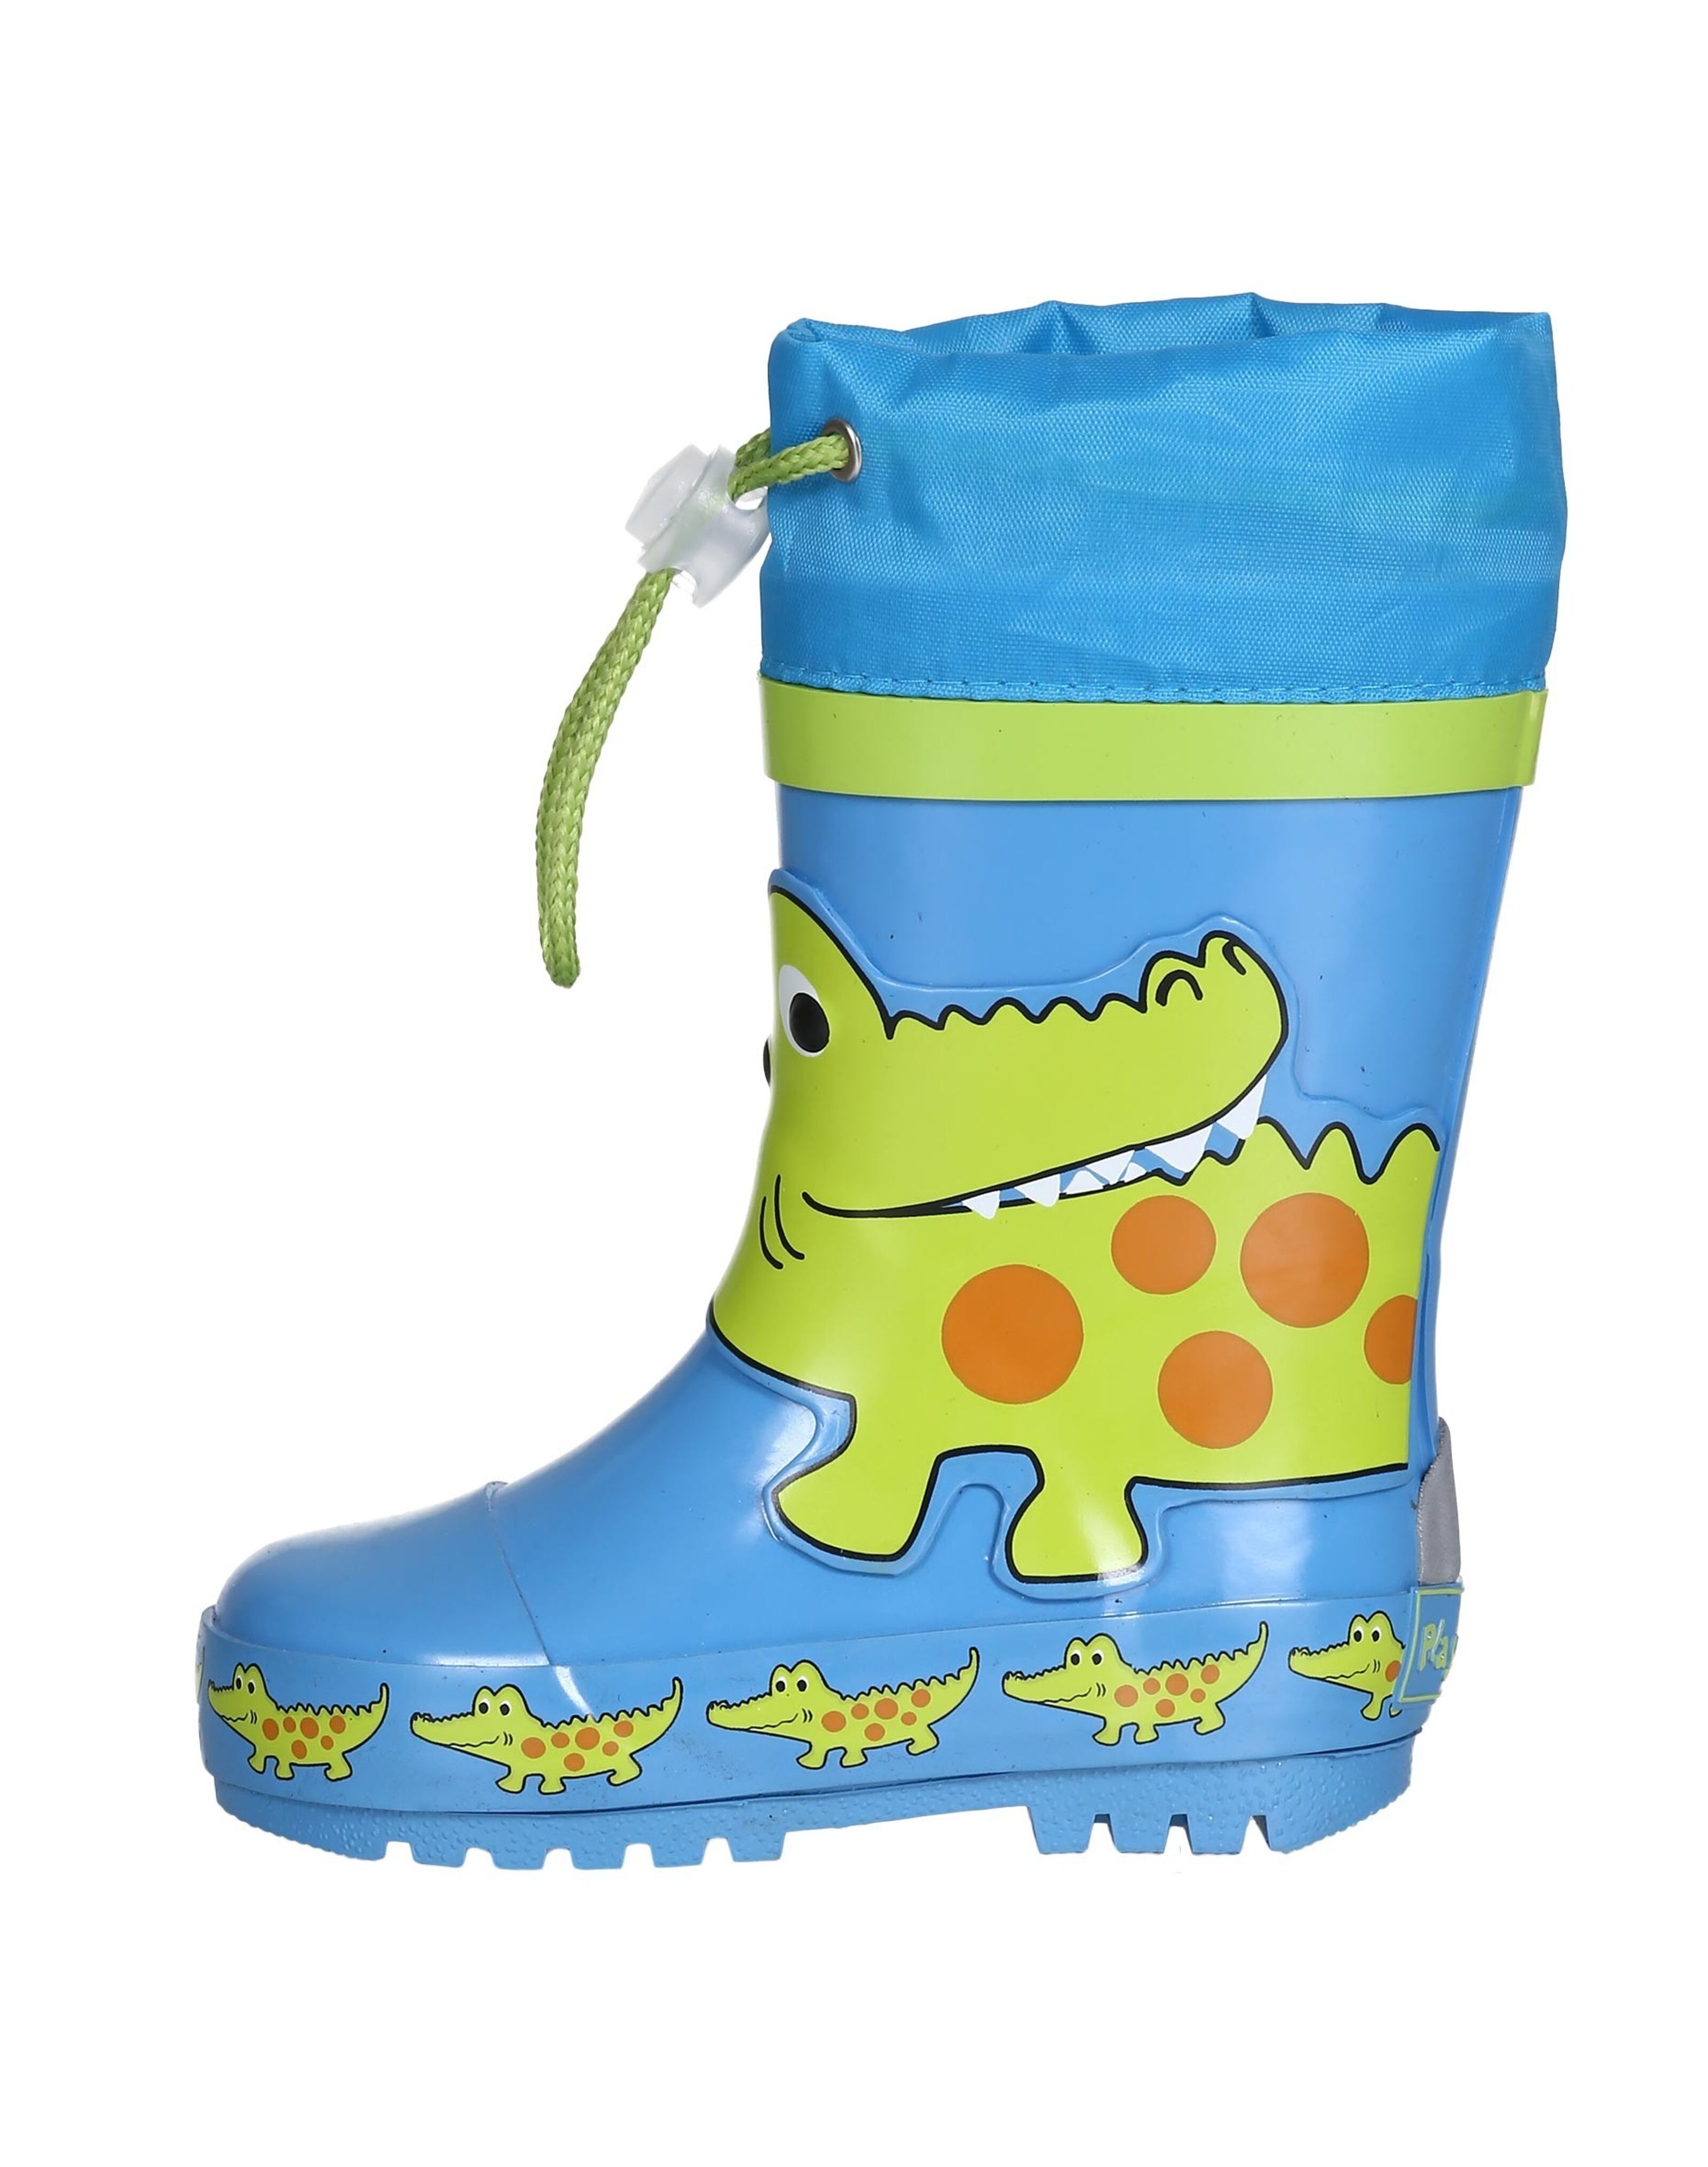 Playshoes - Home shoes for kids - Hippo - Blue